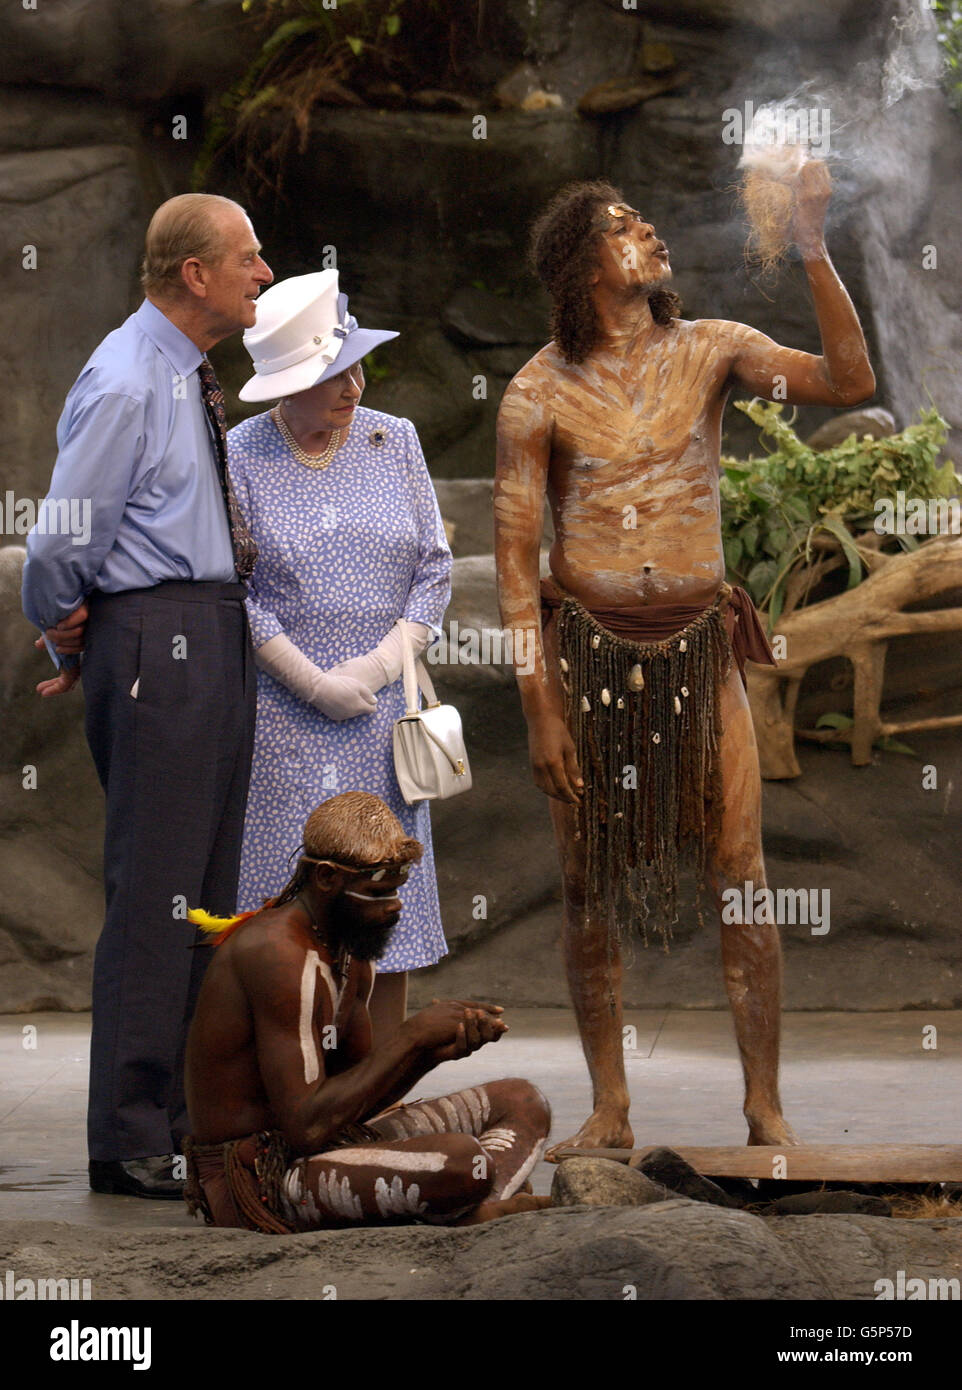 Britain's Queen Elizabeth II and the Duke of Edinburgh watching a culture show at Tjapukai Aboriginal Culture Park, Cairns, Australia Friday. The Duke surprised the aborigines when he asked them 'Do you still throw spears at each other?' *The Royal couple watched a performance by the Tjapukai dance troop of nine Aboriginal male dancers in loin cloths and wearing body paint, and a didgeridoo player. Stock Photo